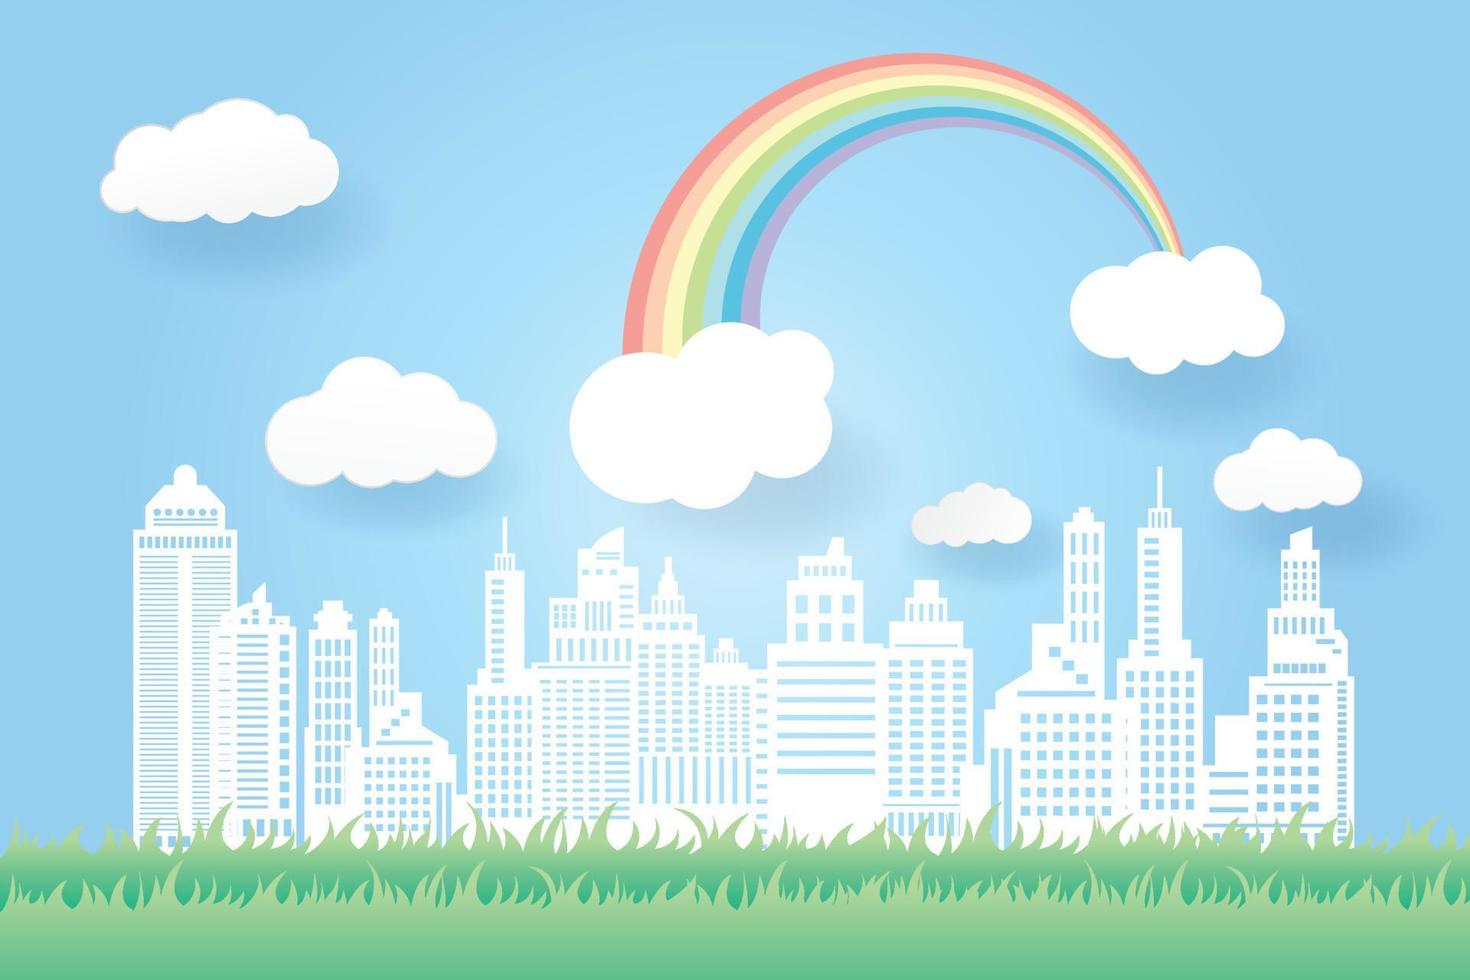 beautiful rainbow and flowers in the city scape , paper art style vector